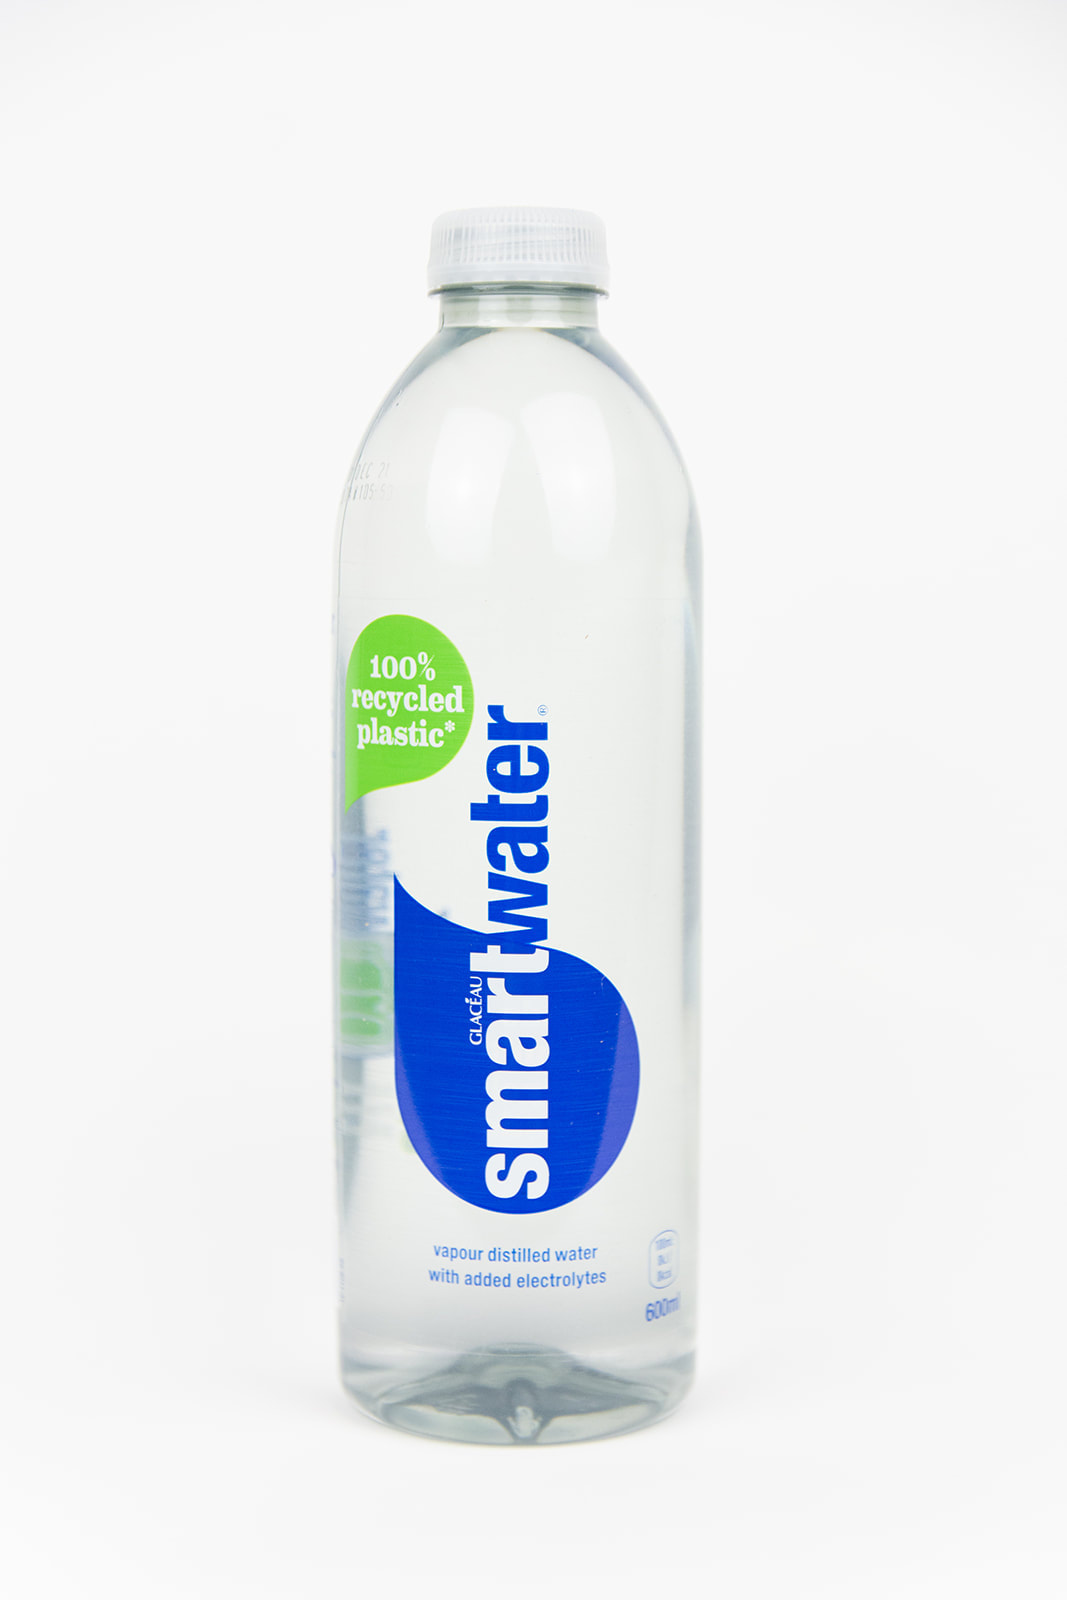 Commercial Product Photography Ireland | Product Photo of bottle of water